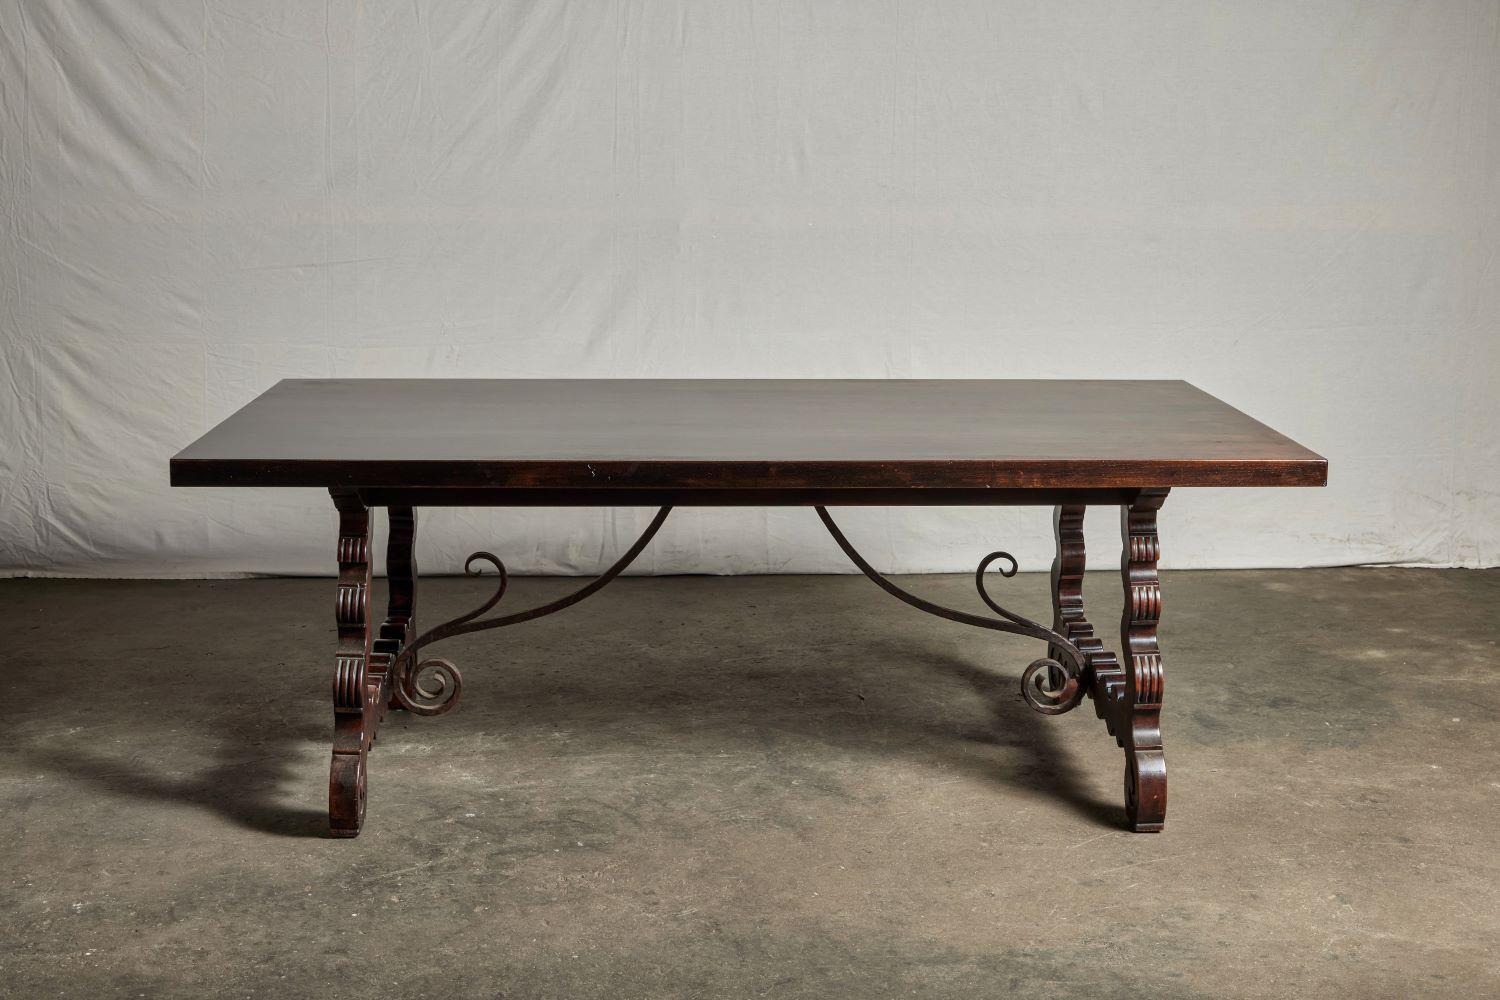 The dining table is made of mahogany and brass and features a slab top on a trestle base with iron brackets and scroll cut legs held together by an S-curve brass detail.